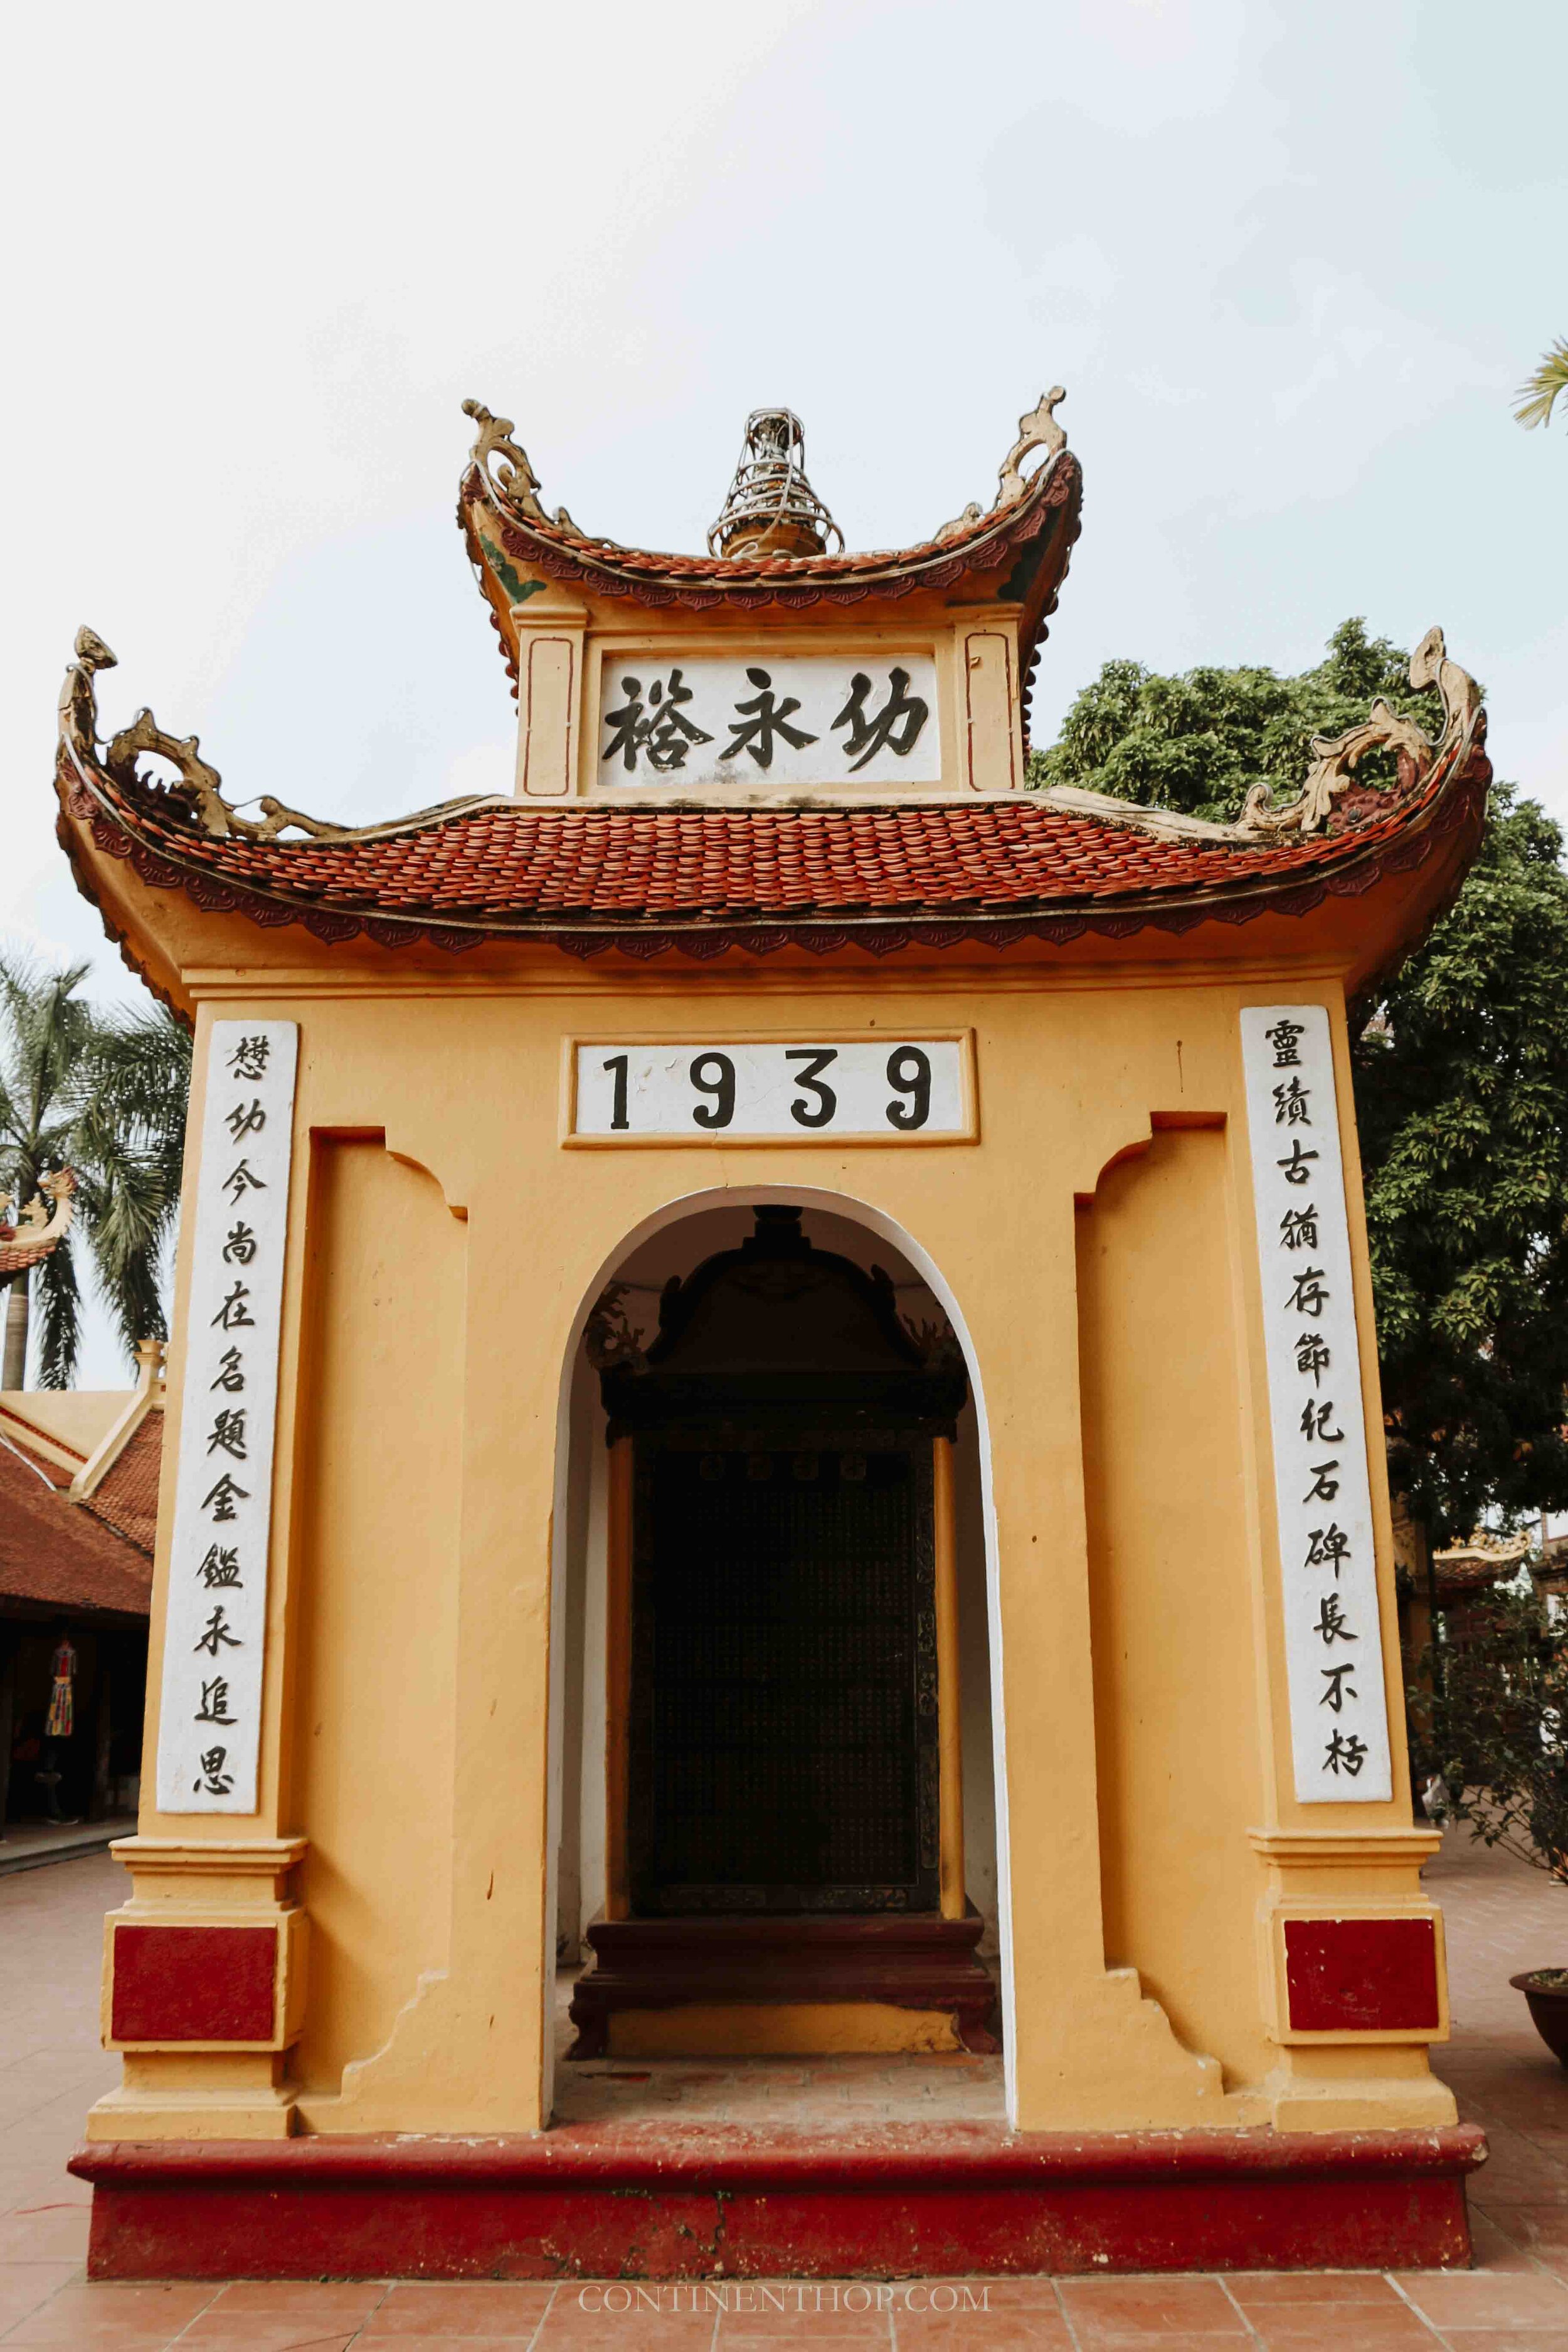 Image of a yellow archway to a pagoda in Hanoi Vietnam